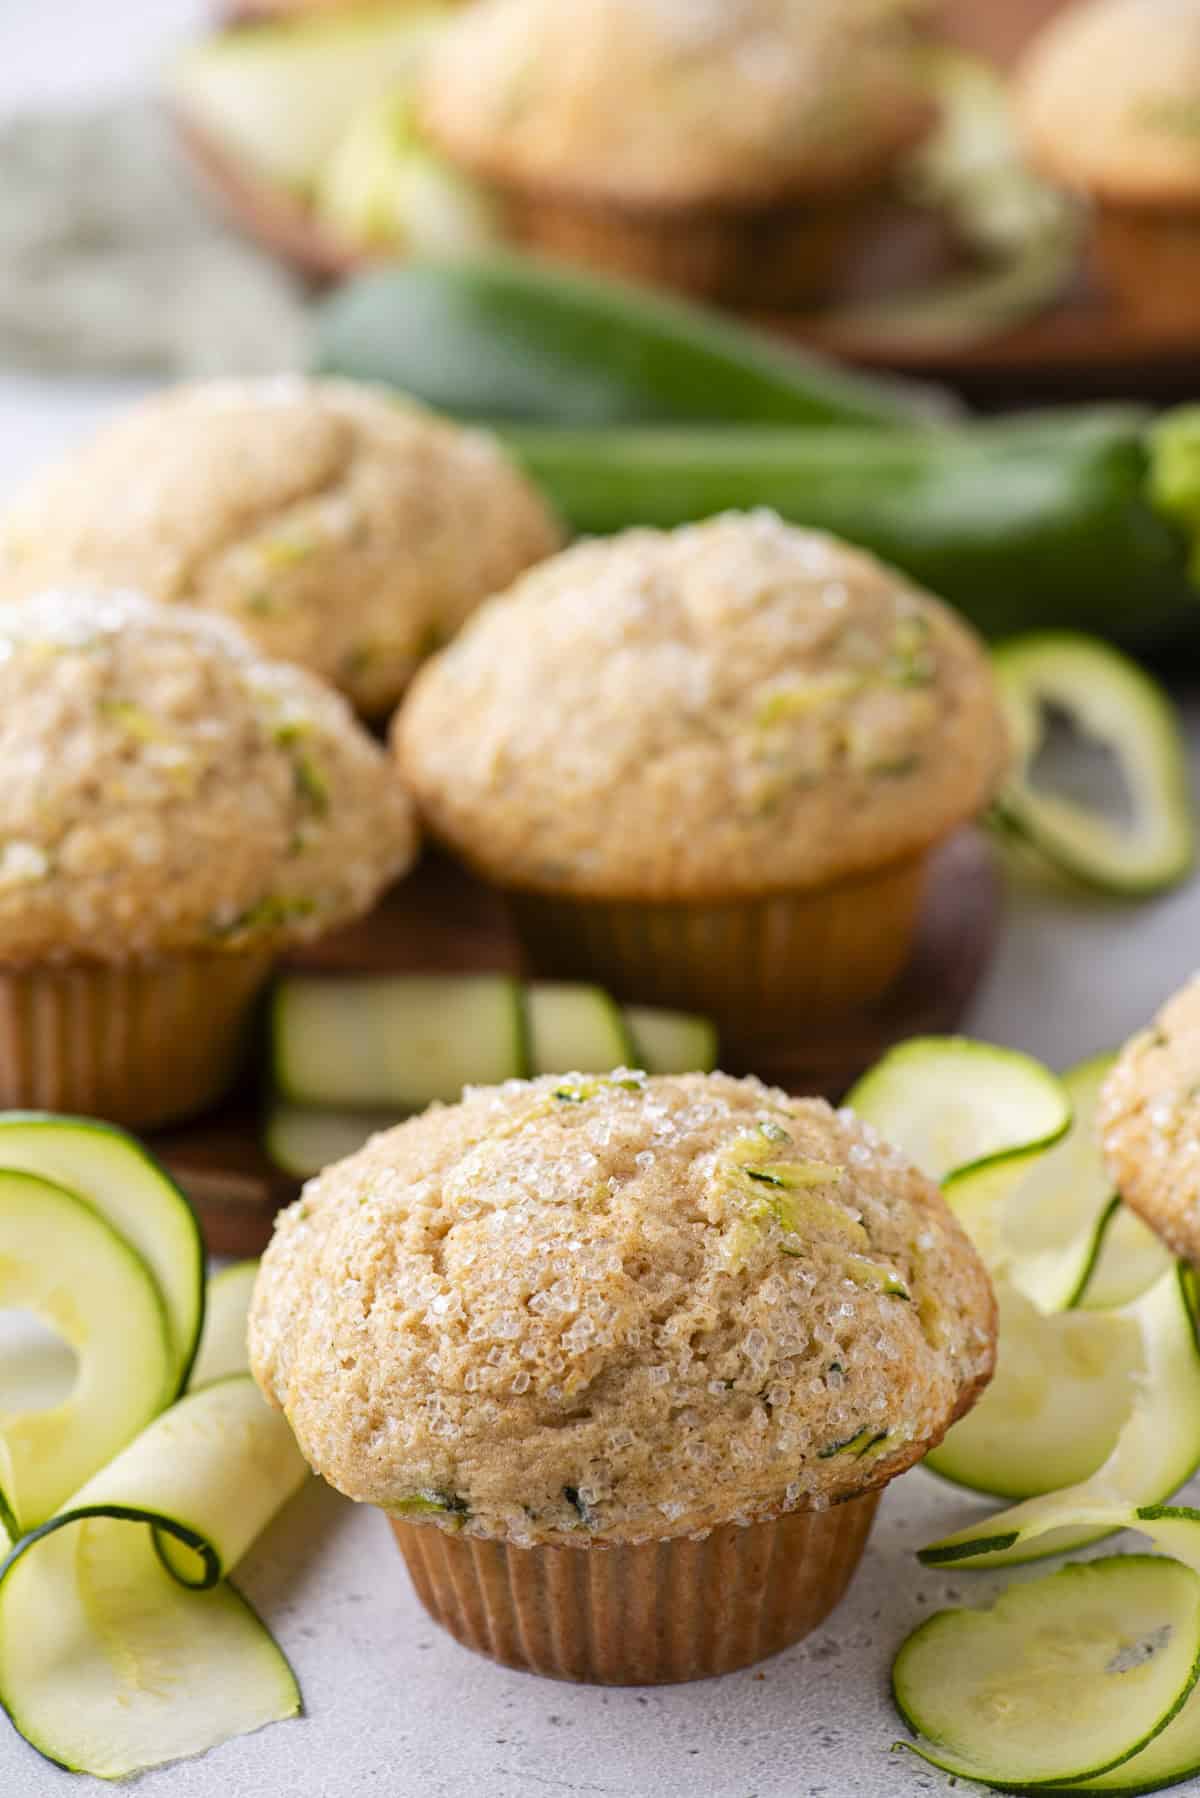 a zucchini muffin with zucchini slices around it and more muffins and whole zucchinis in the background